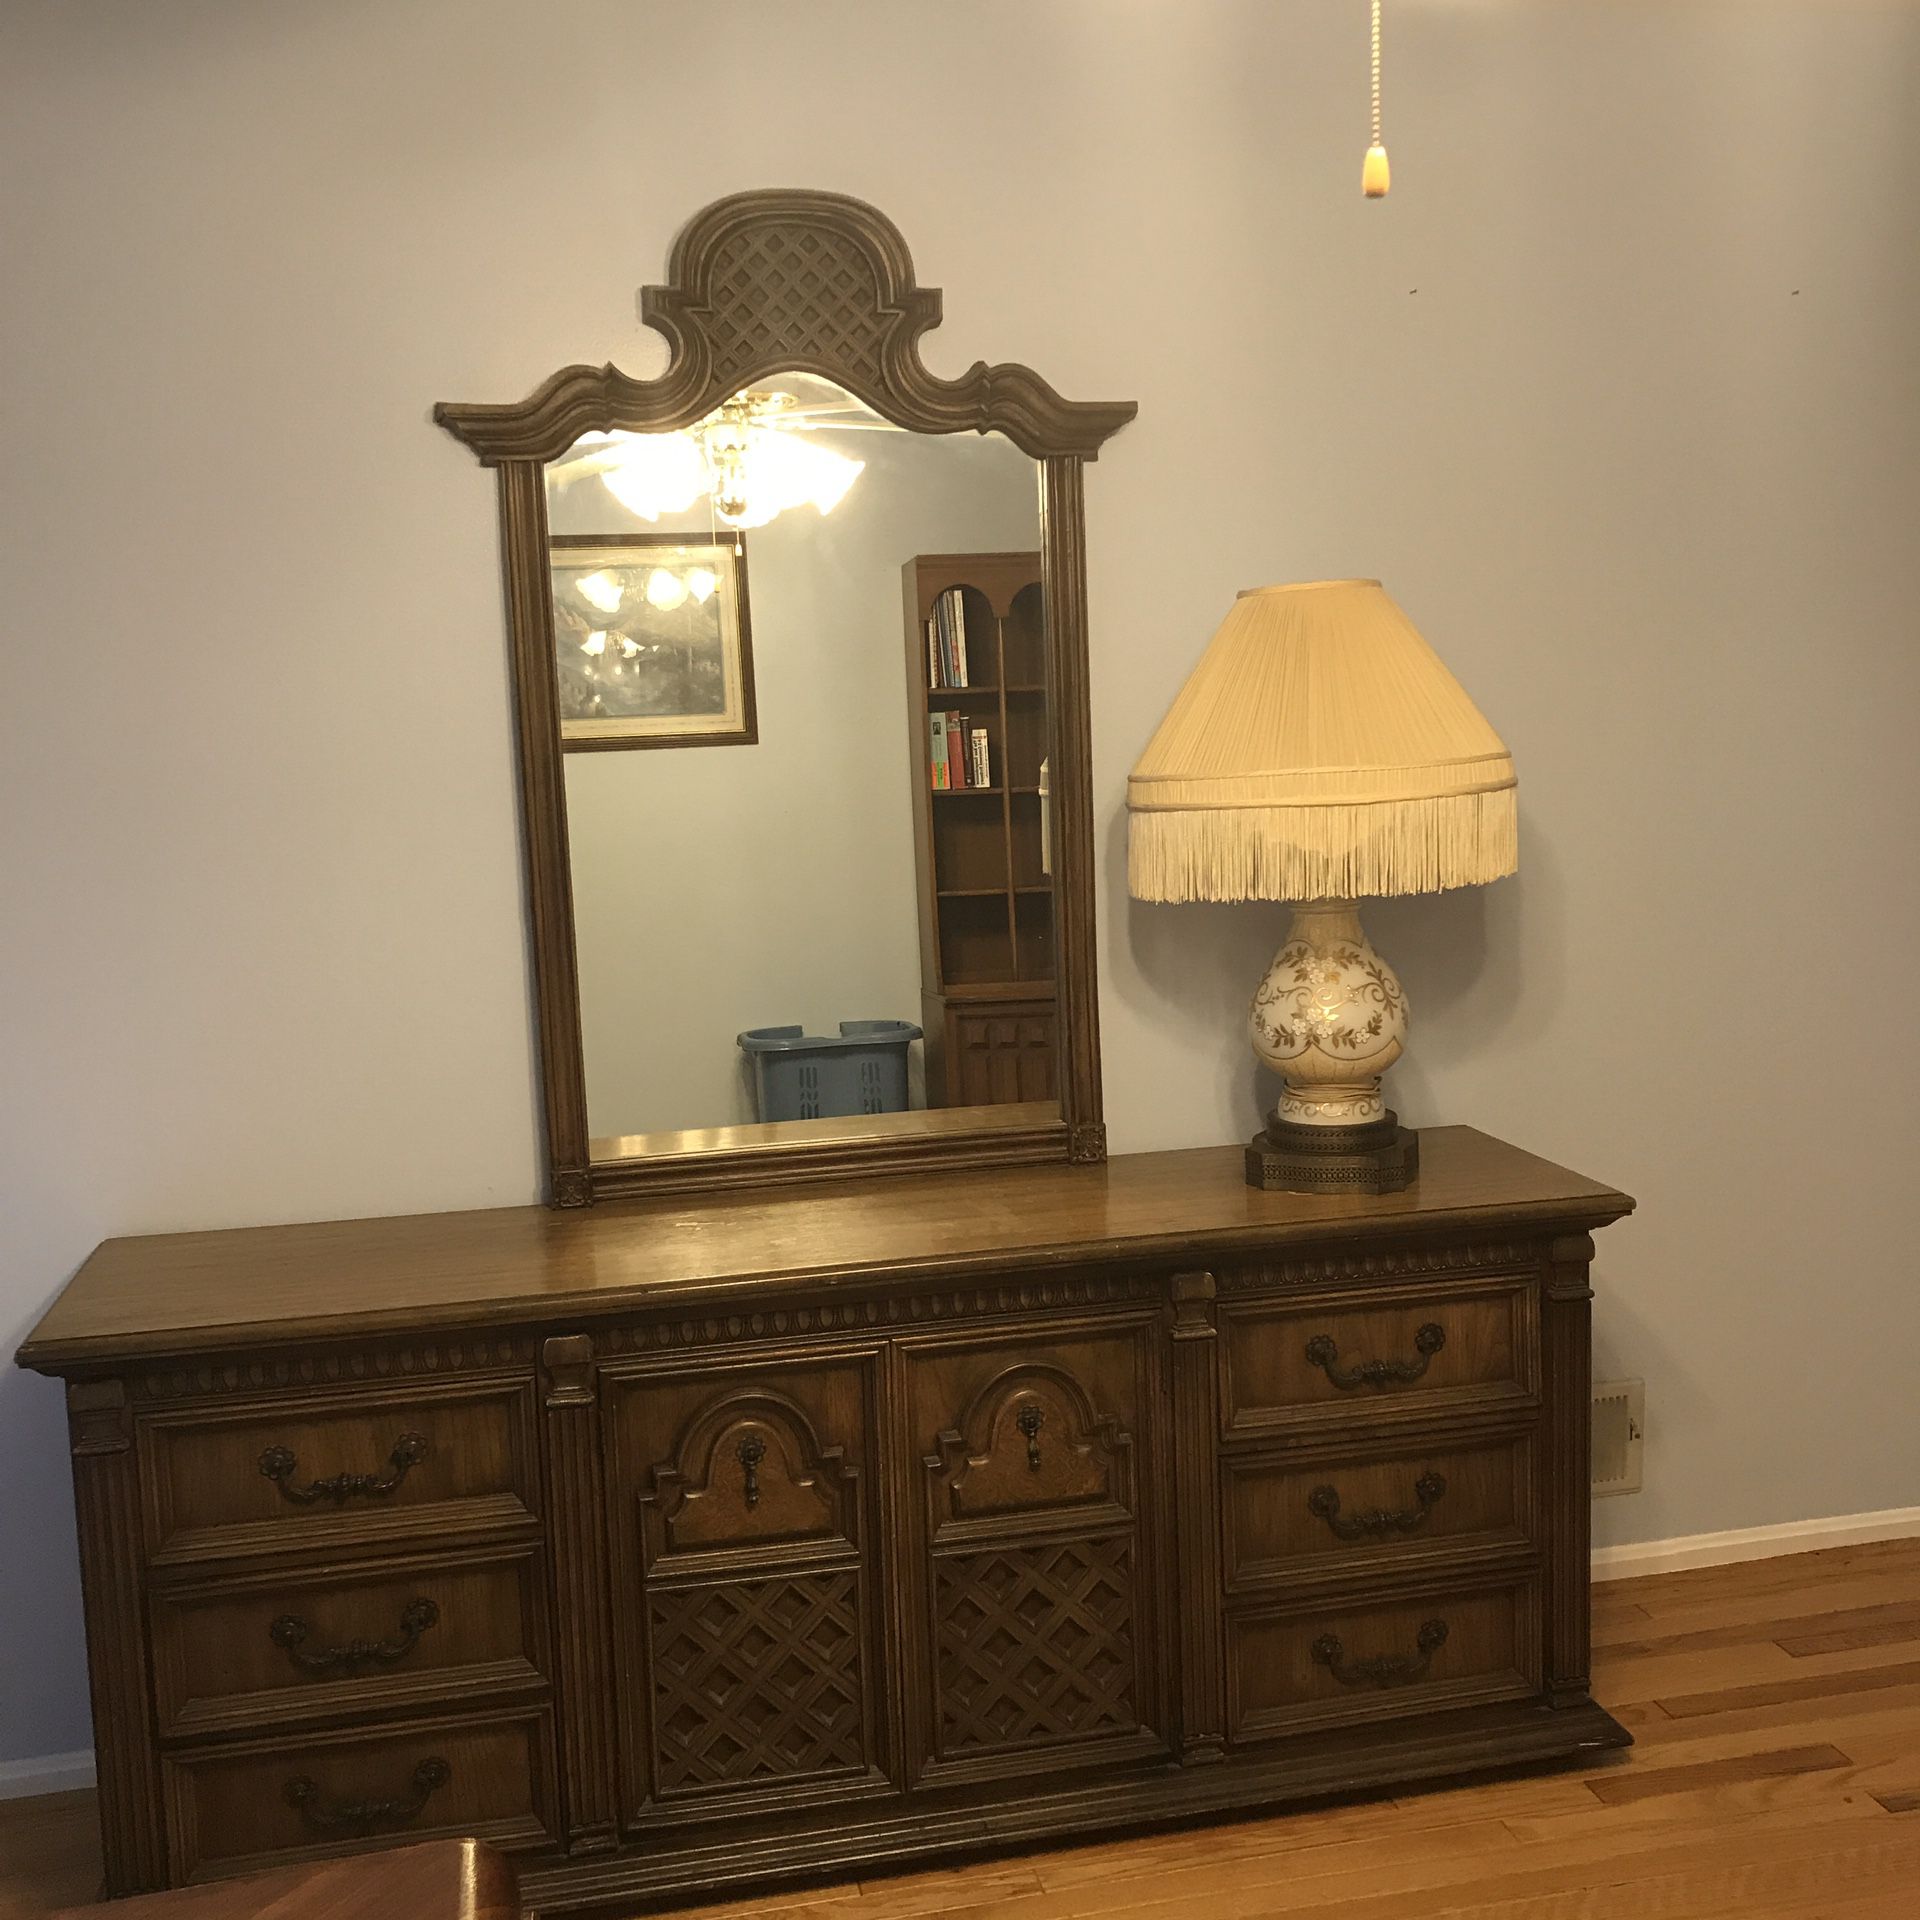 Great solid wood dresser and 2 night stands.